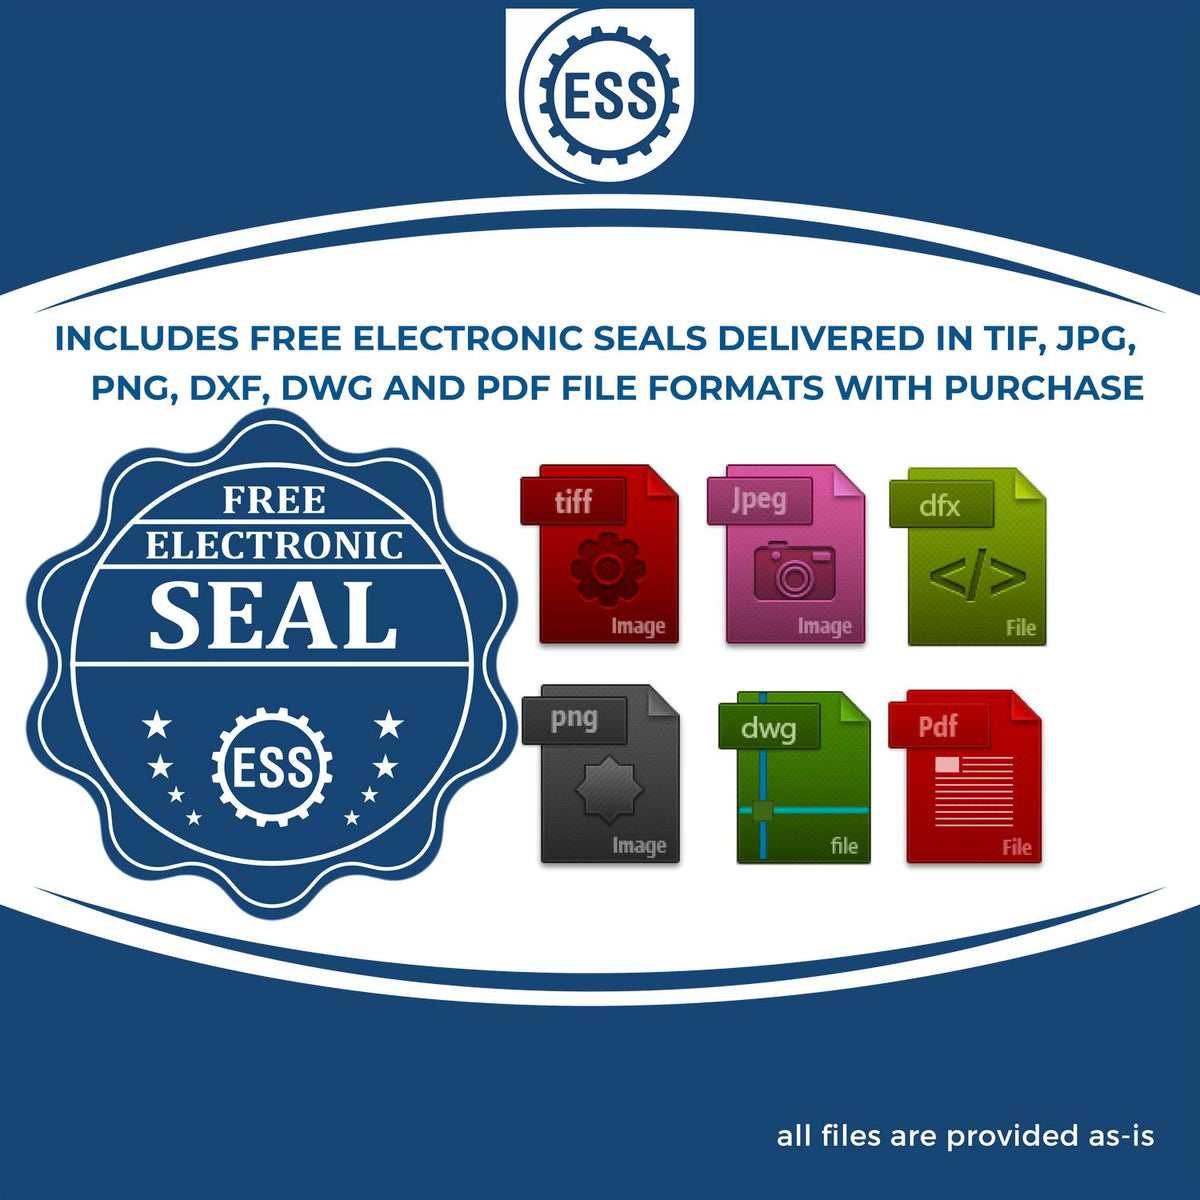 An infographic for the free electronic seal for the Slim Pre-Inked New Hampshire Architect Seal Stamp illustrating the different file type icons such as DXF, DWG, TIF, JPG and PNG.